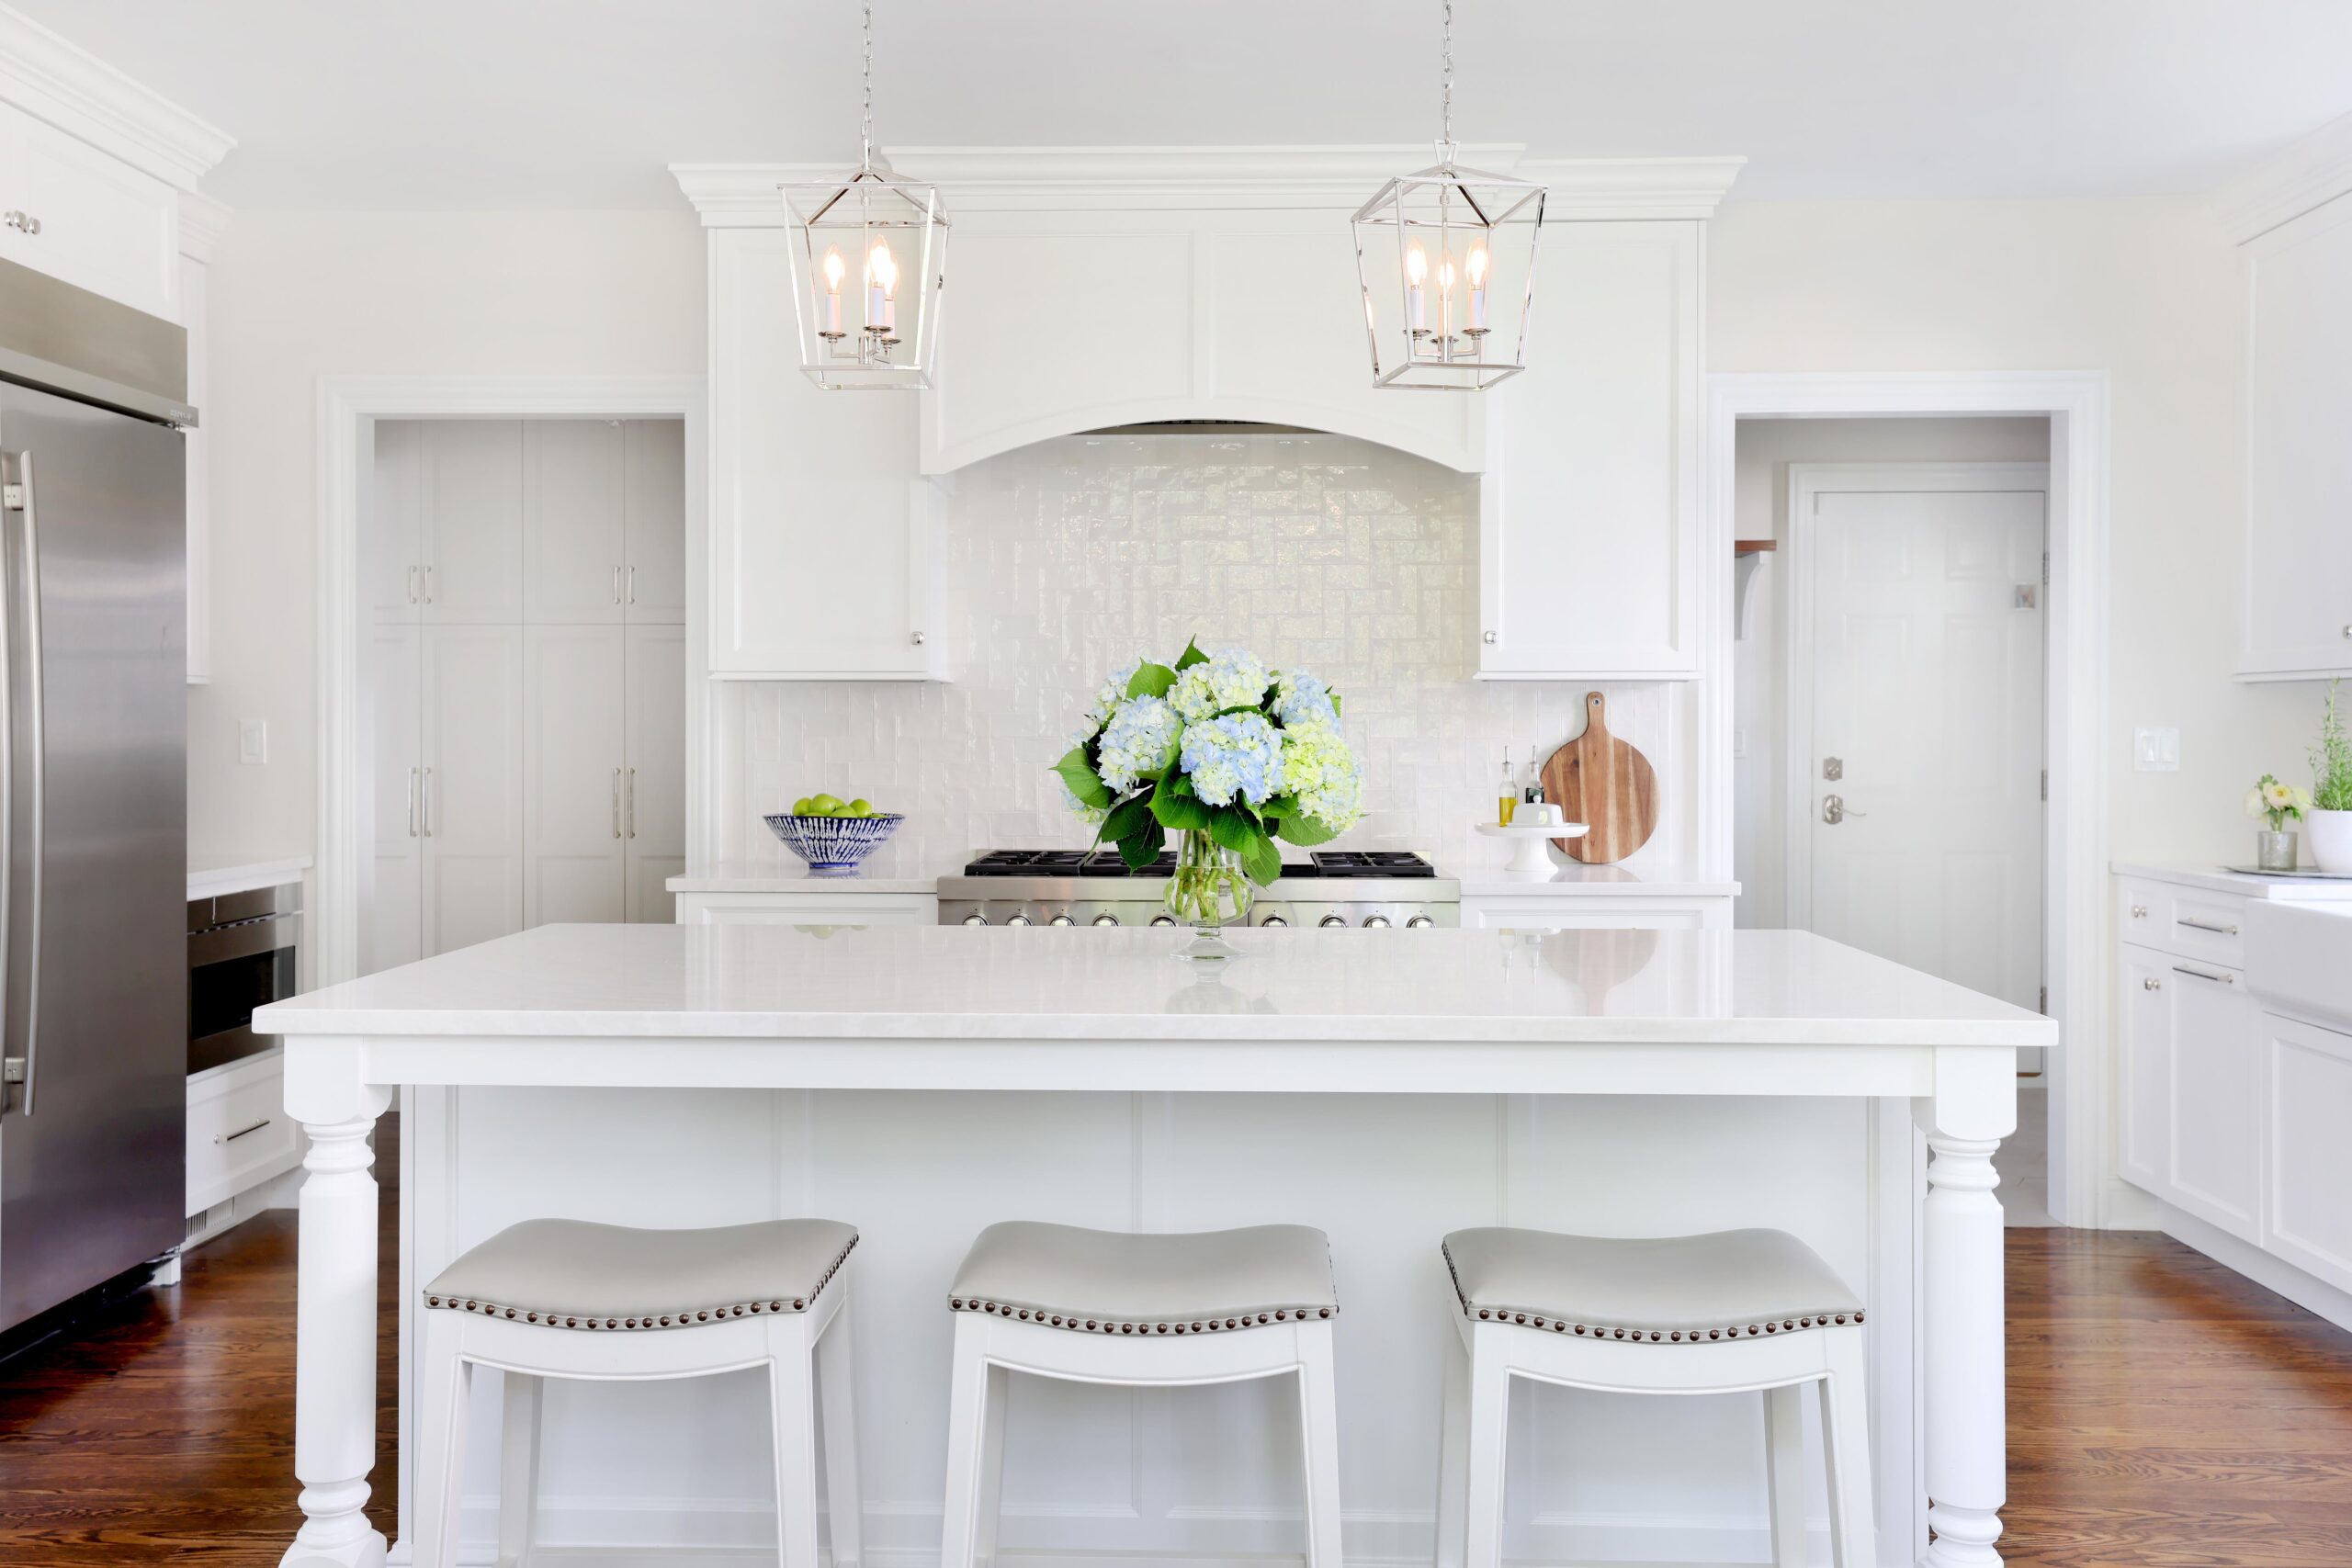 large white island with stools in white kitchen with decorative lighting